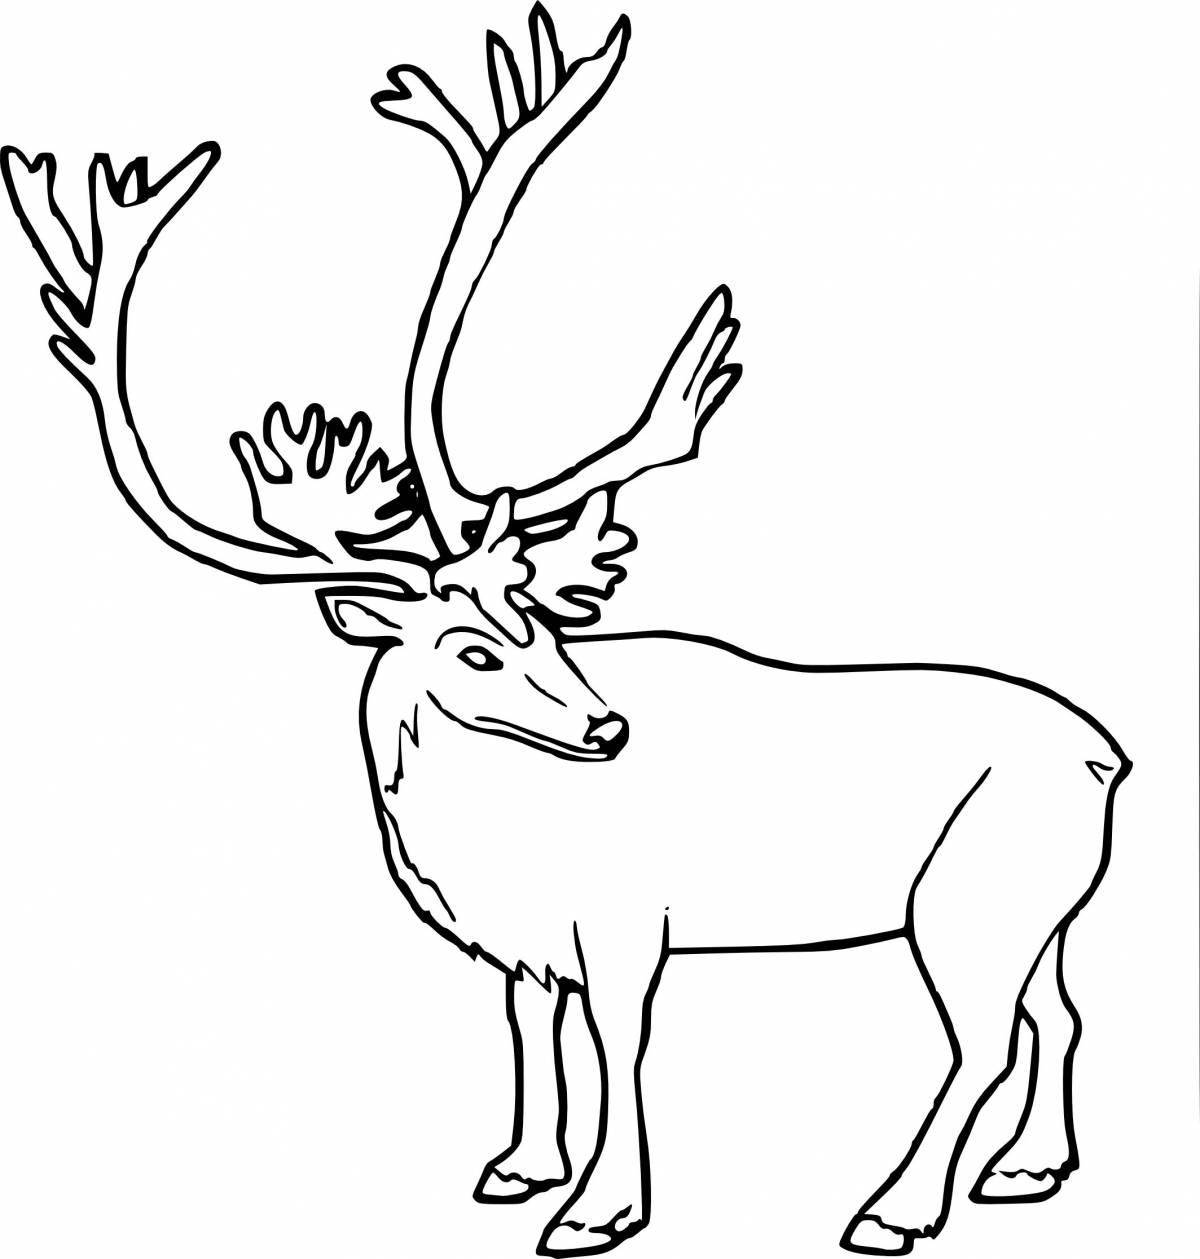 Attractive northern animal coloring page